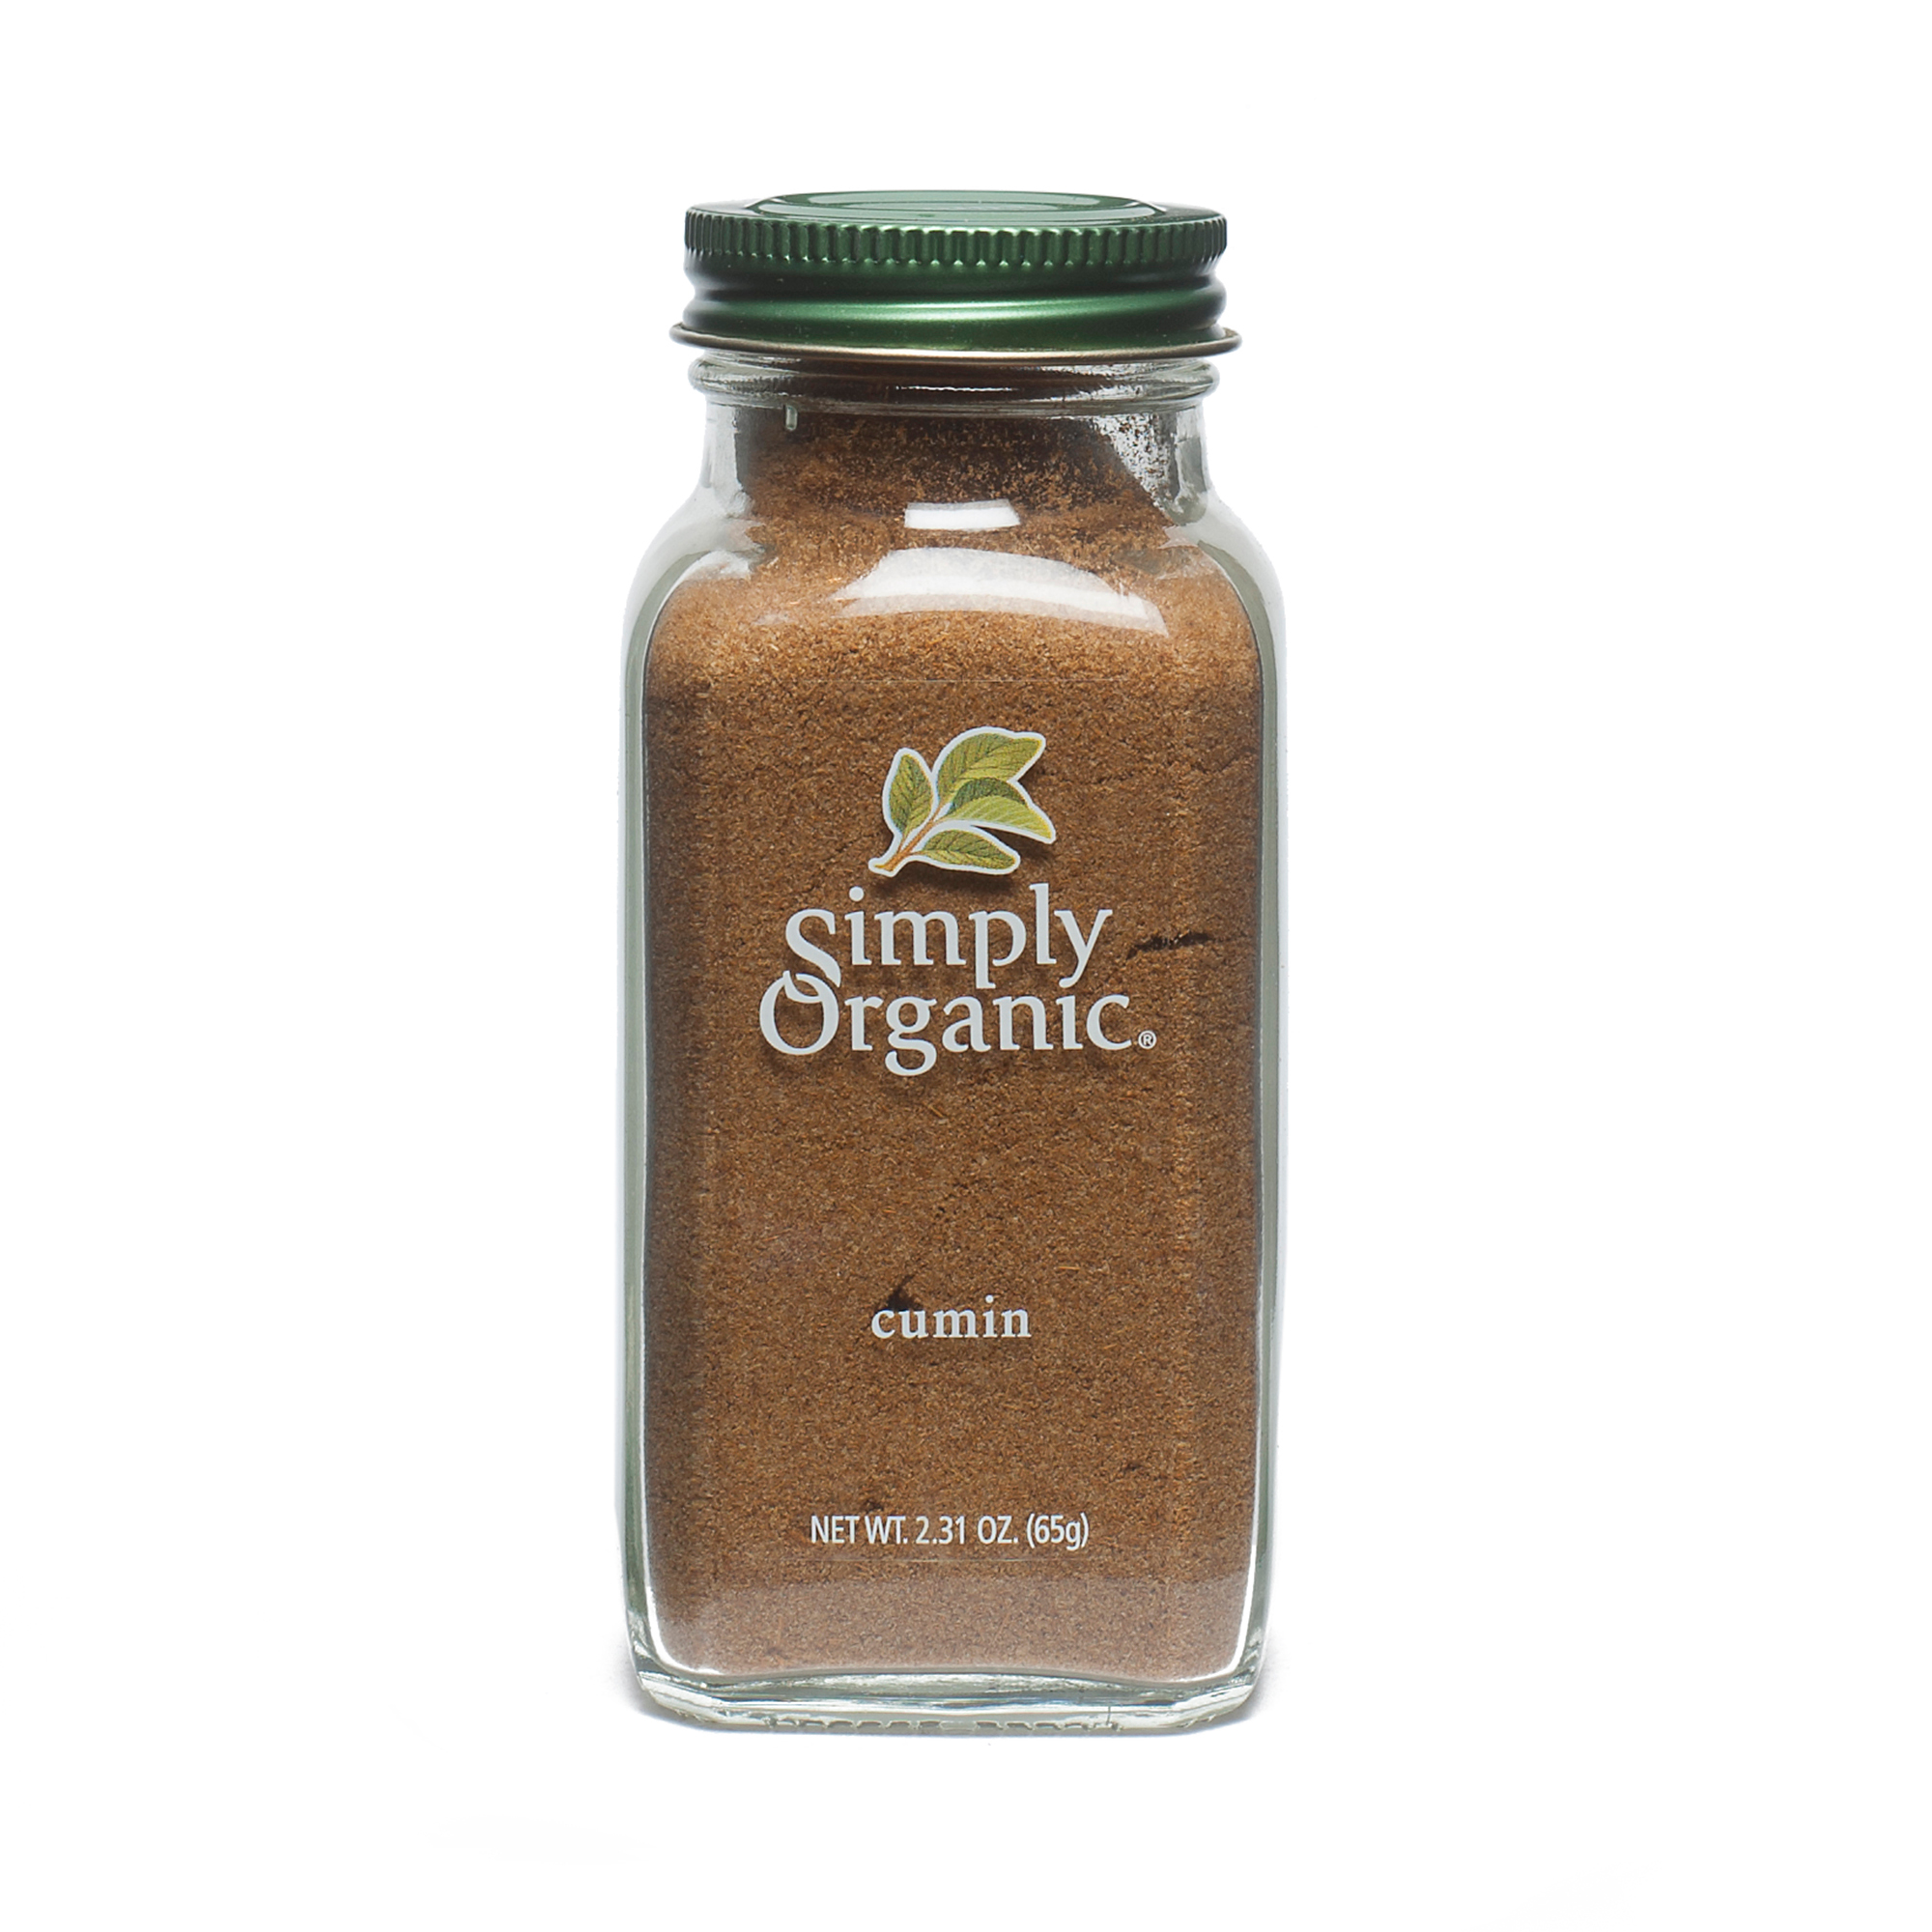 Simply Organic Ground Cumin Seed 2.31 oz container